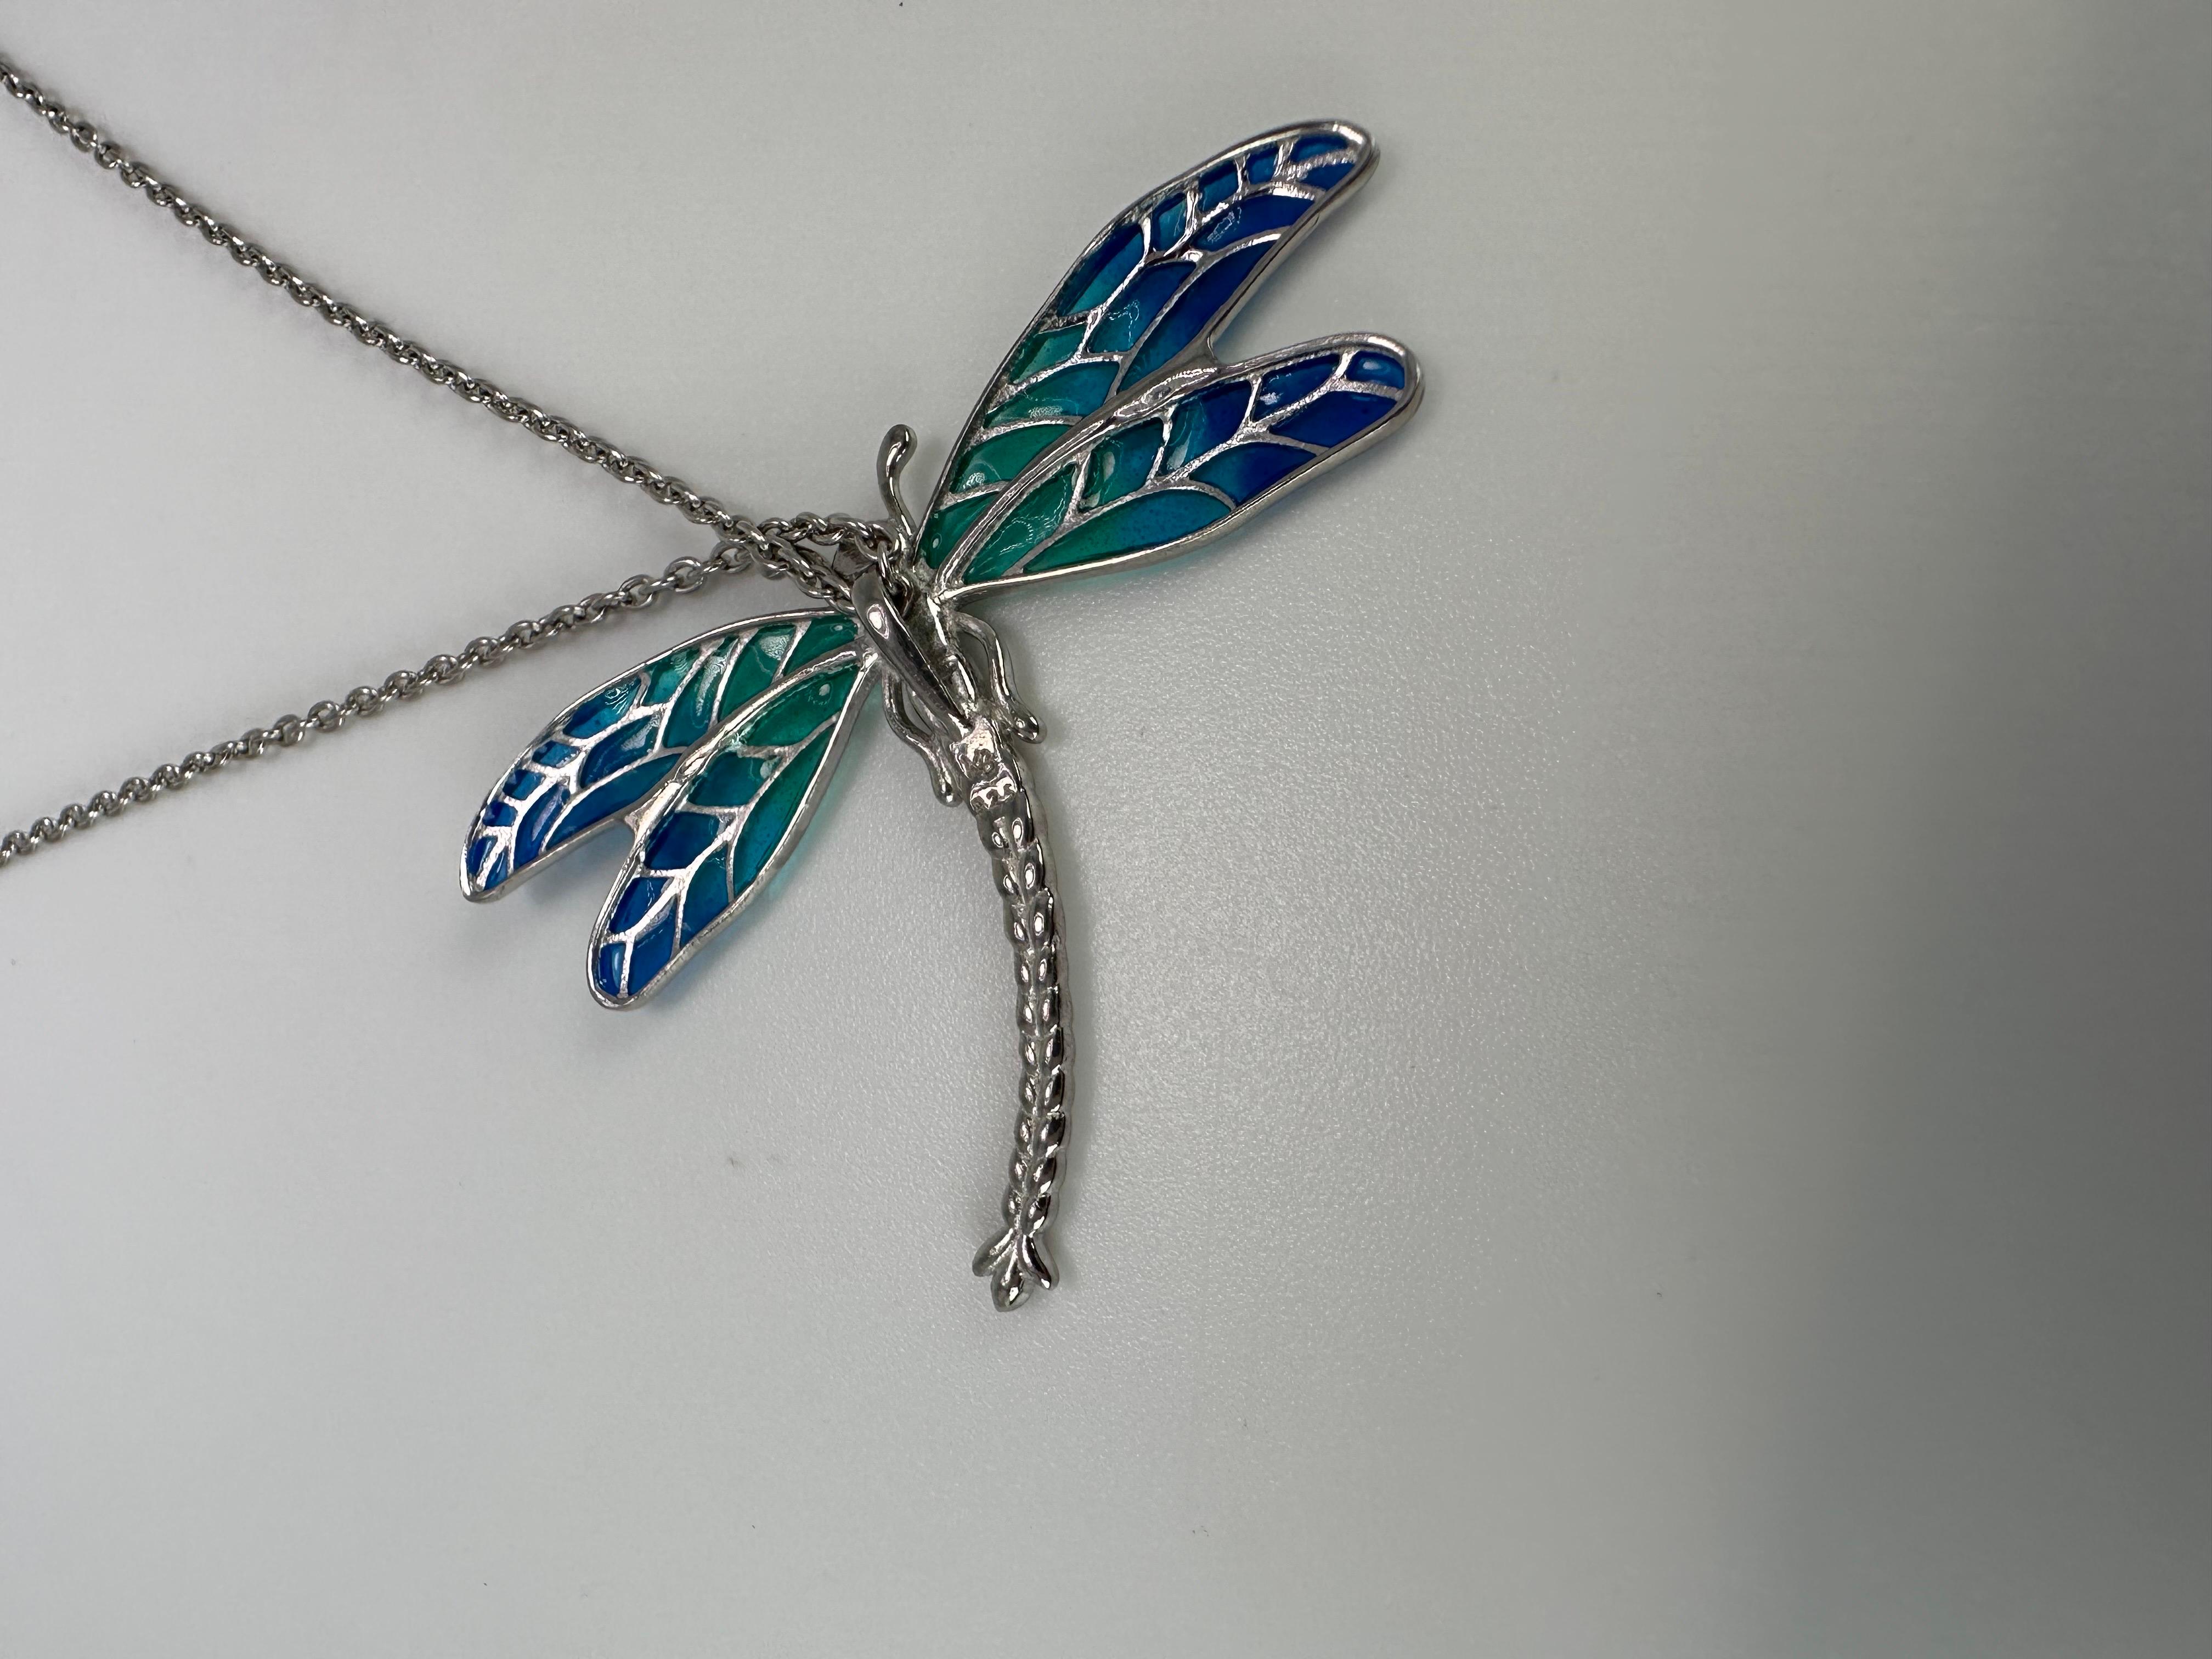 Dragonfly pendant necklace enamel pendant 925 ss In New Condition For Sale In Jupiter, FL